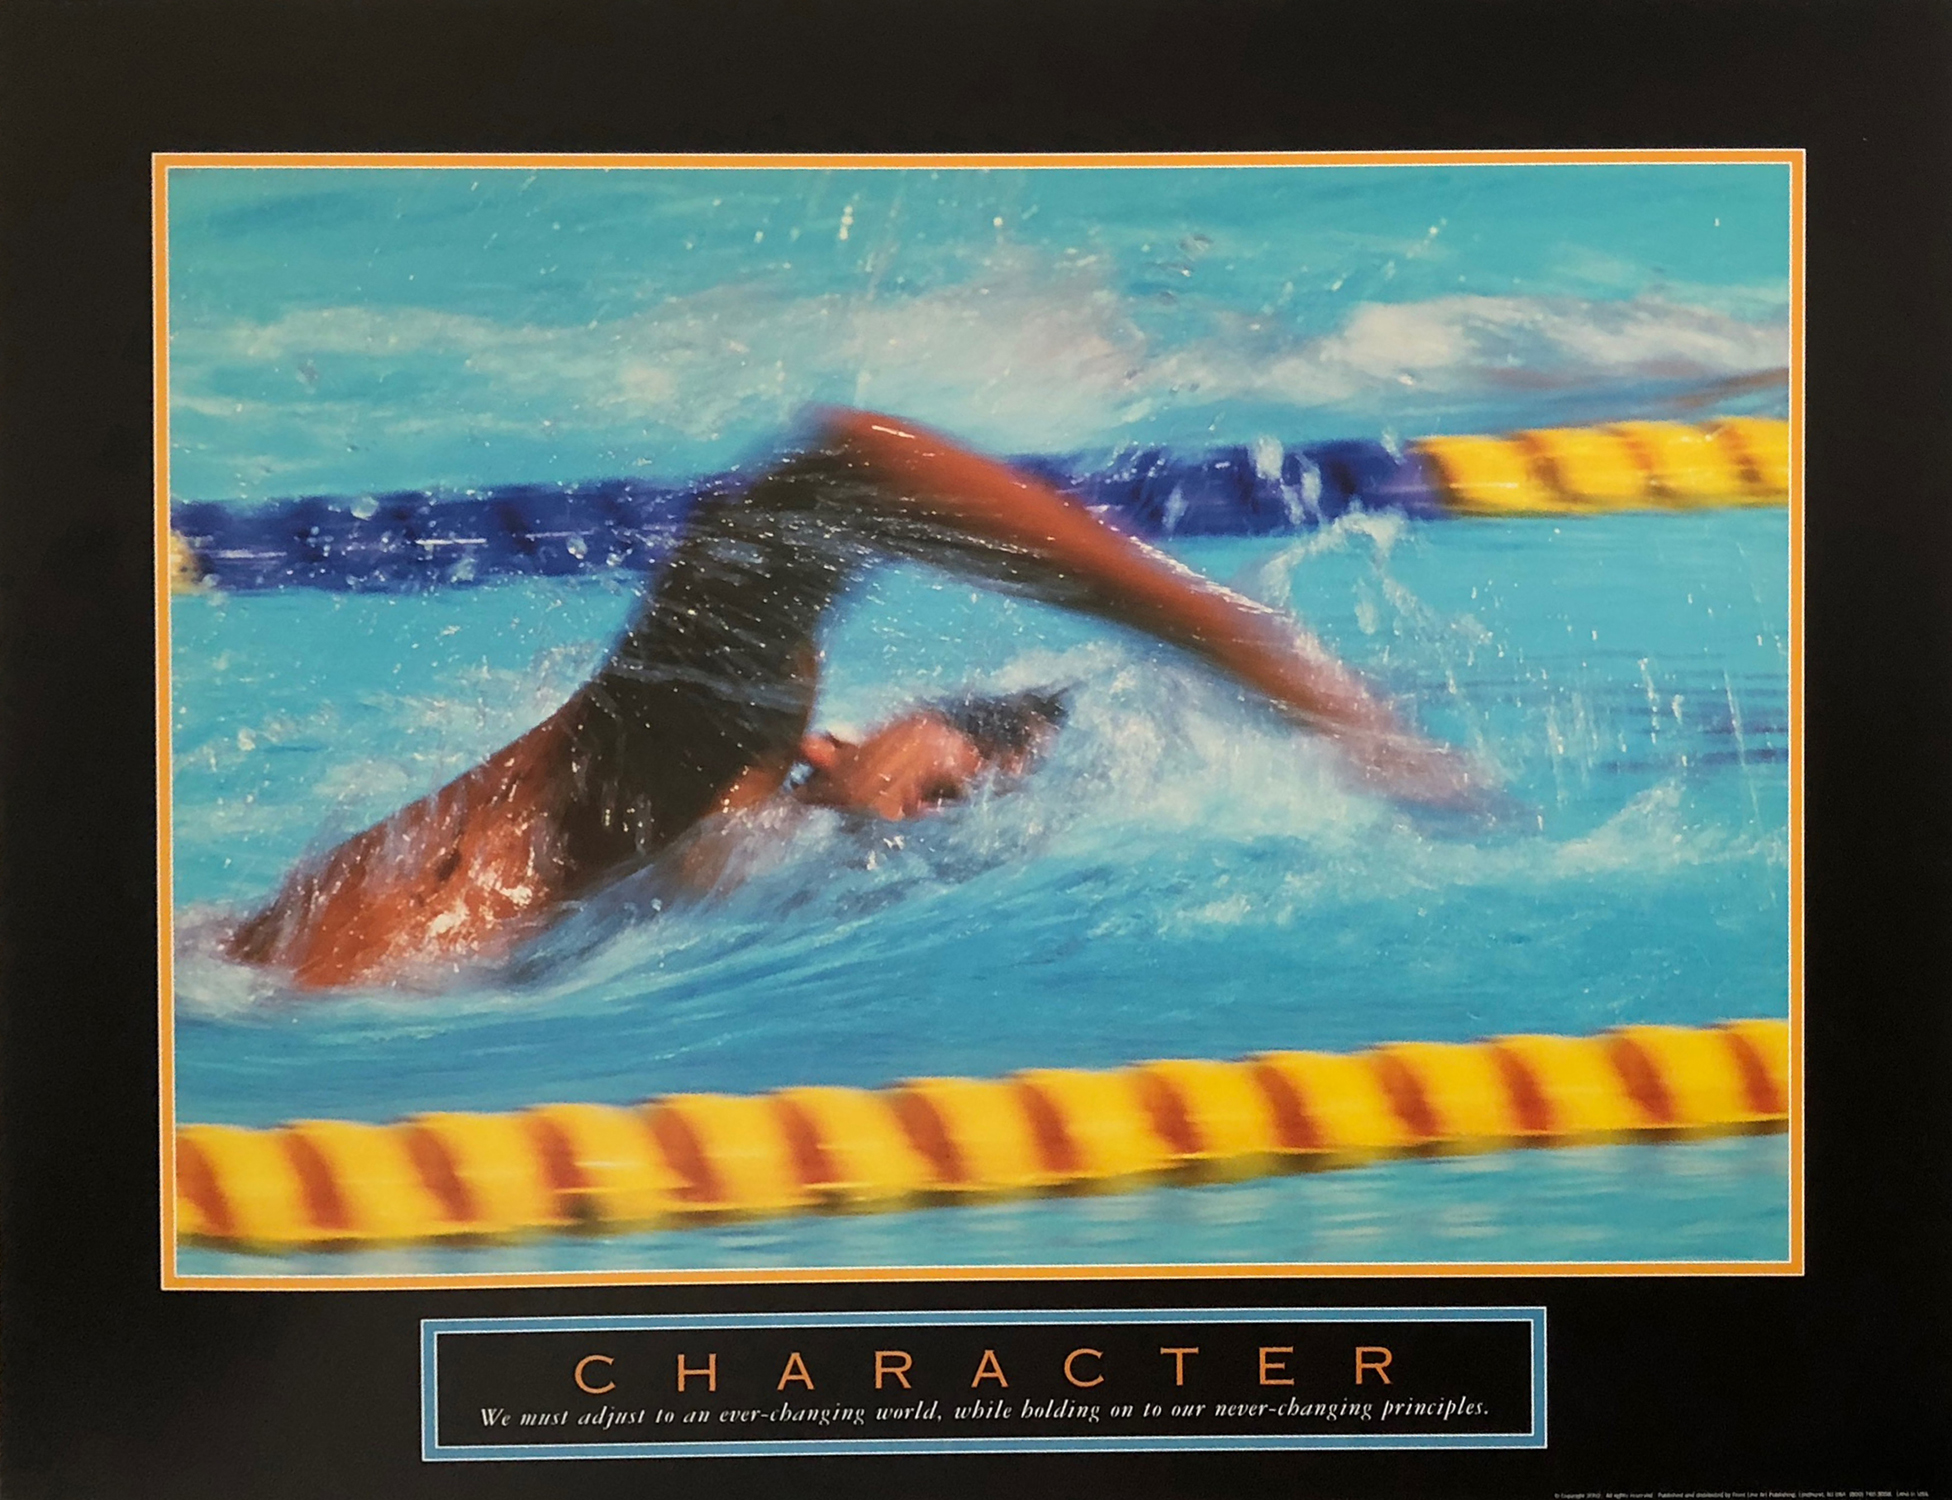 Character - Swimmer